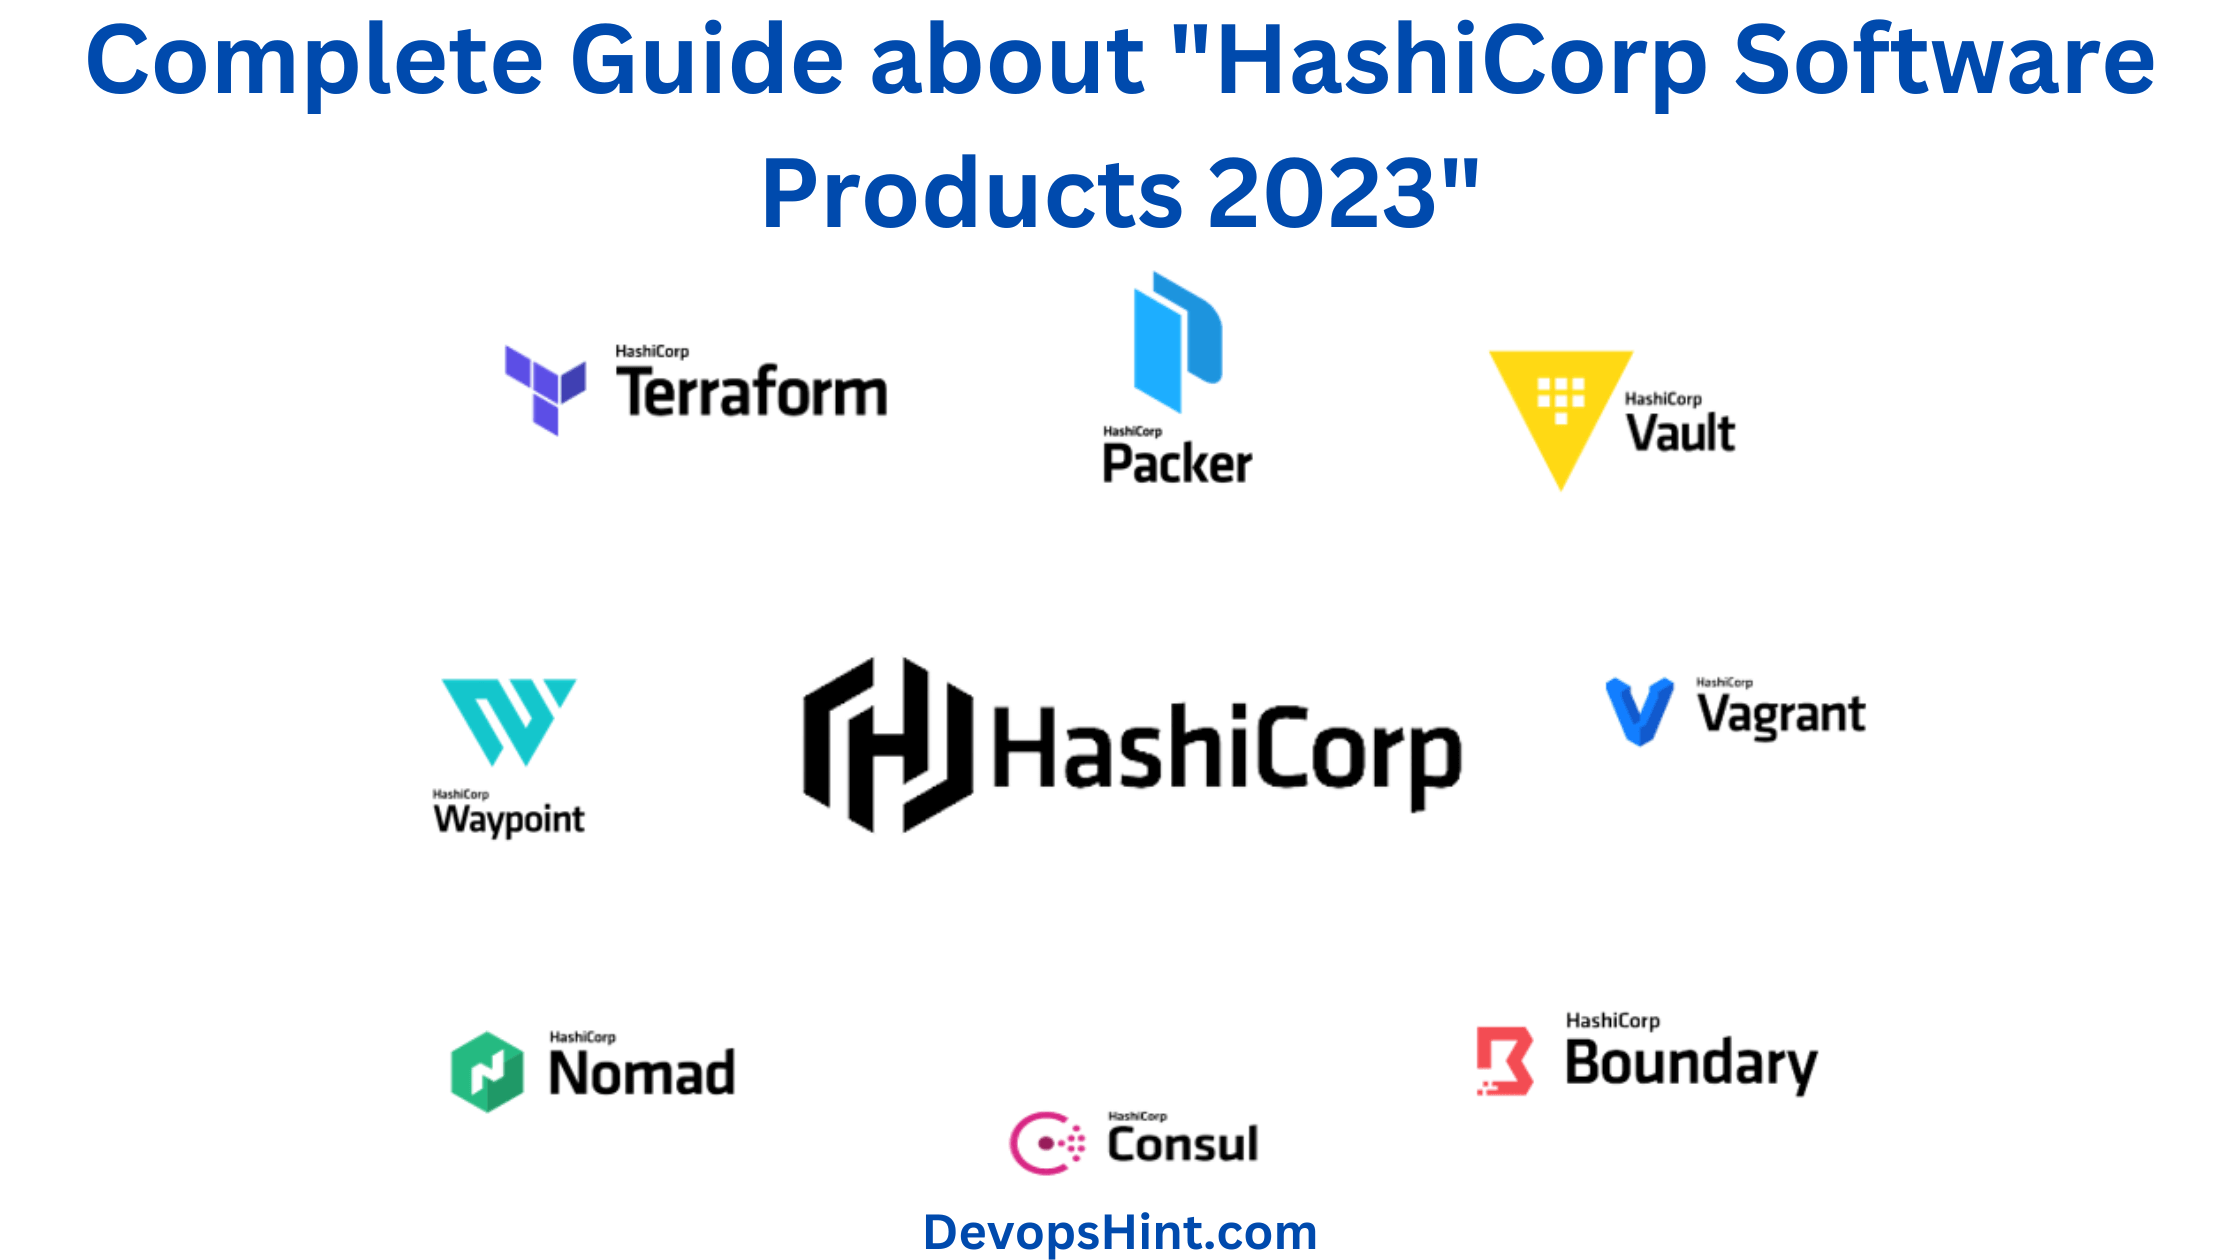 HashiCorp Software tools